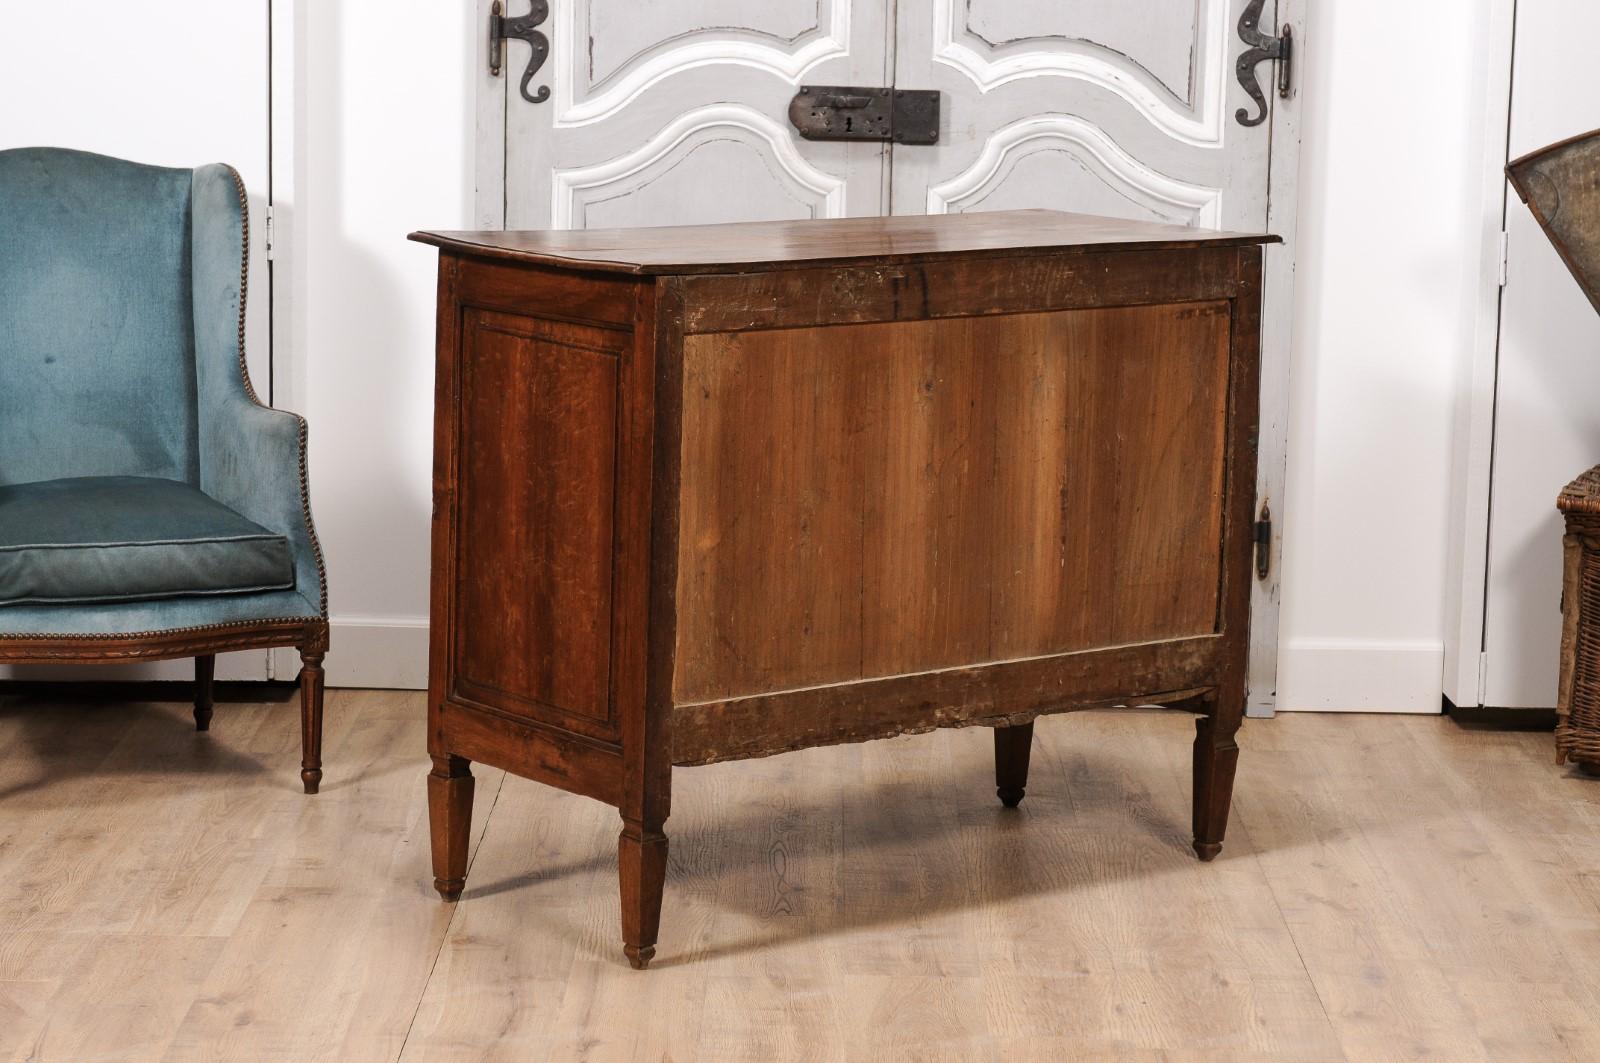 Italian 1820s Serpentine Front Walnut Commode with Three Drawers For Sale 3